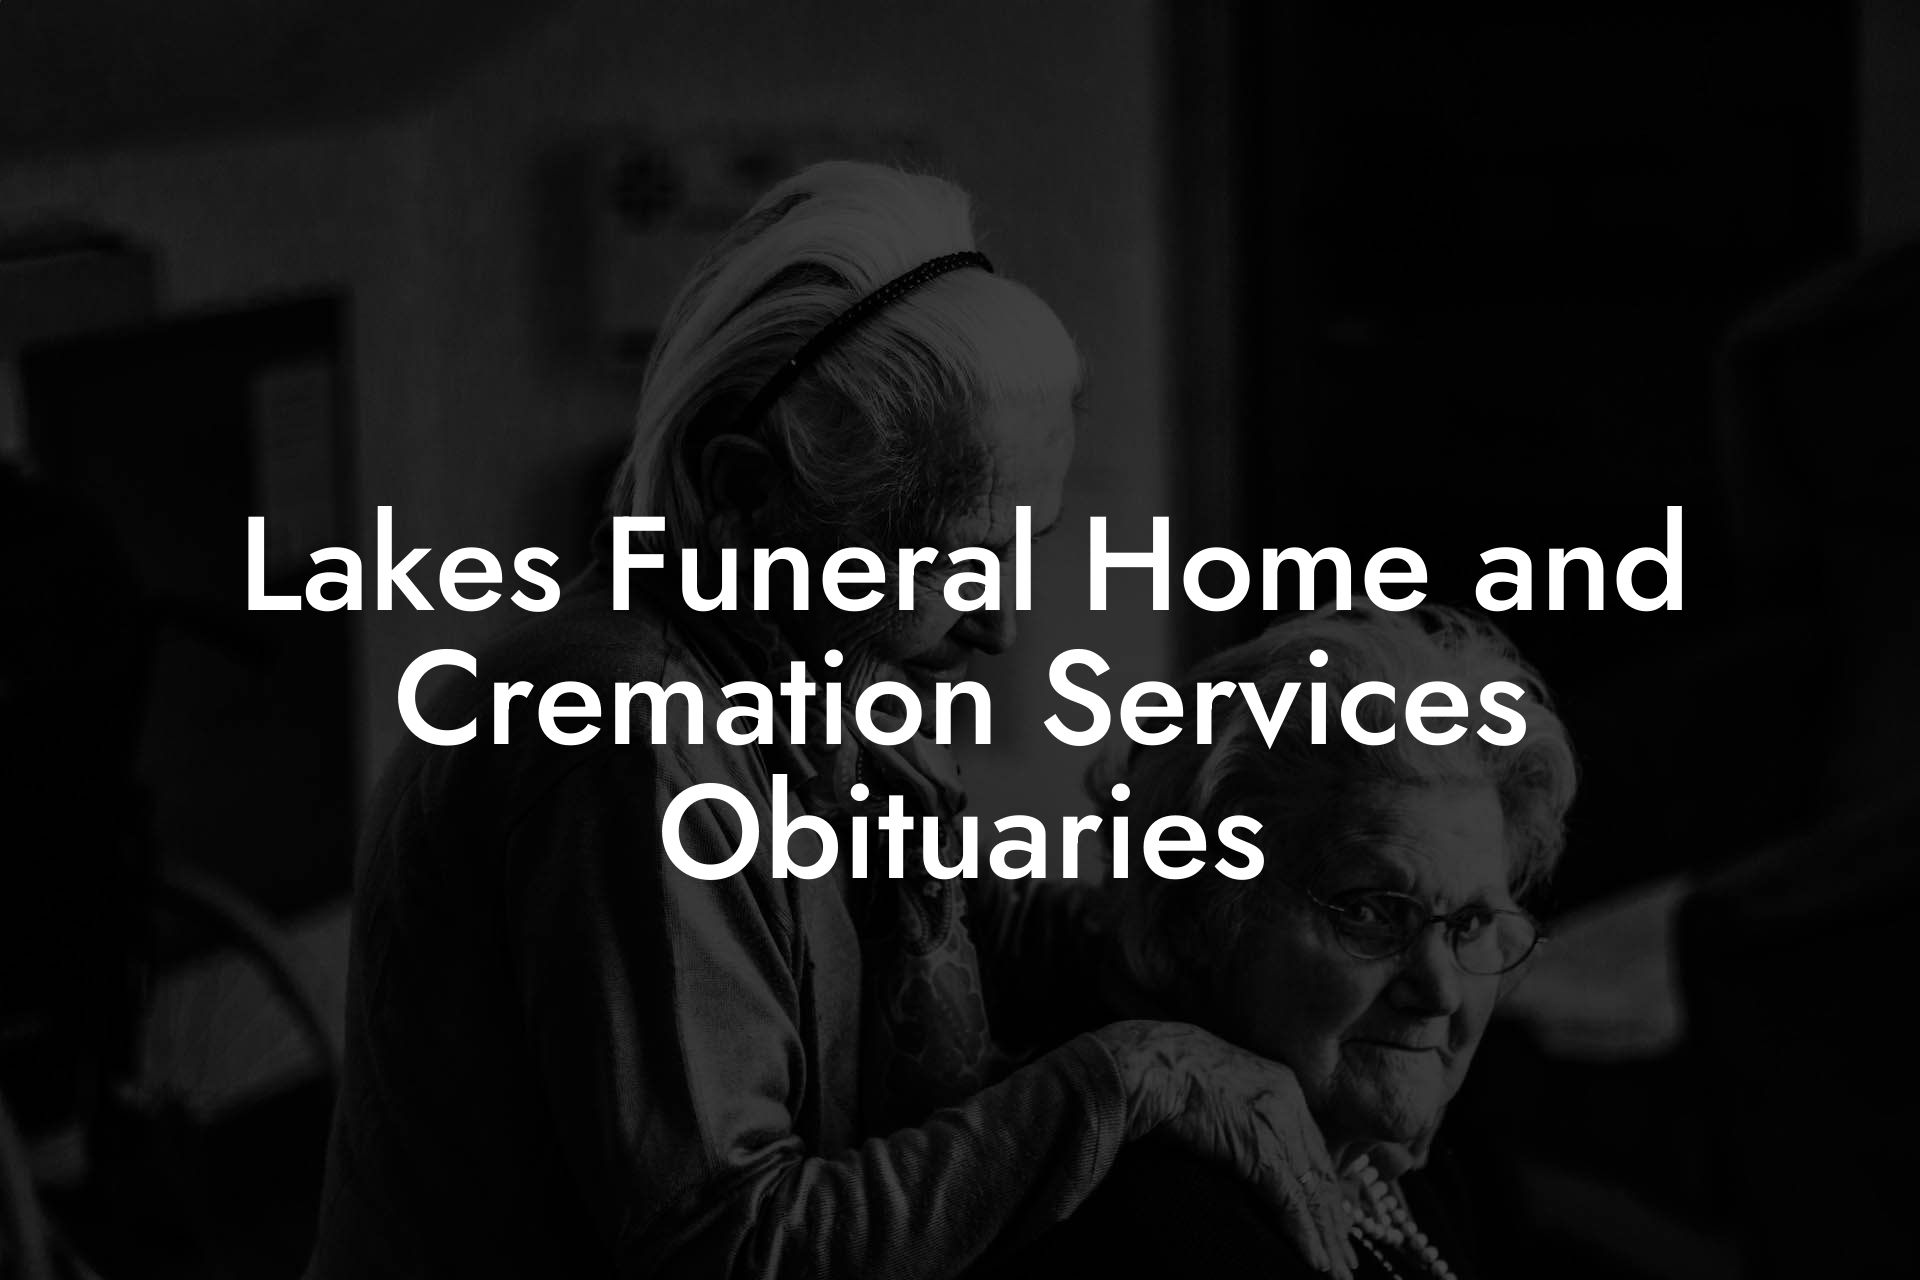 Lakes Funeral Home and Cremation Services Obituaries - Eulogy Assistant